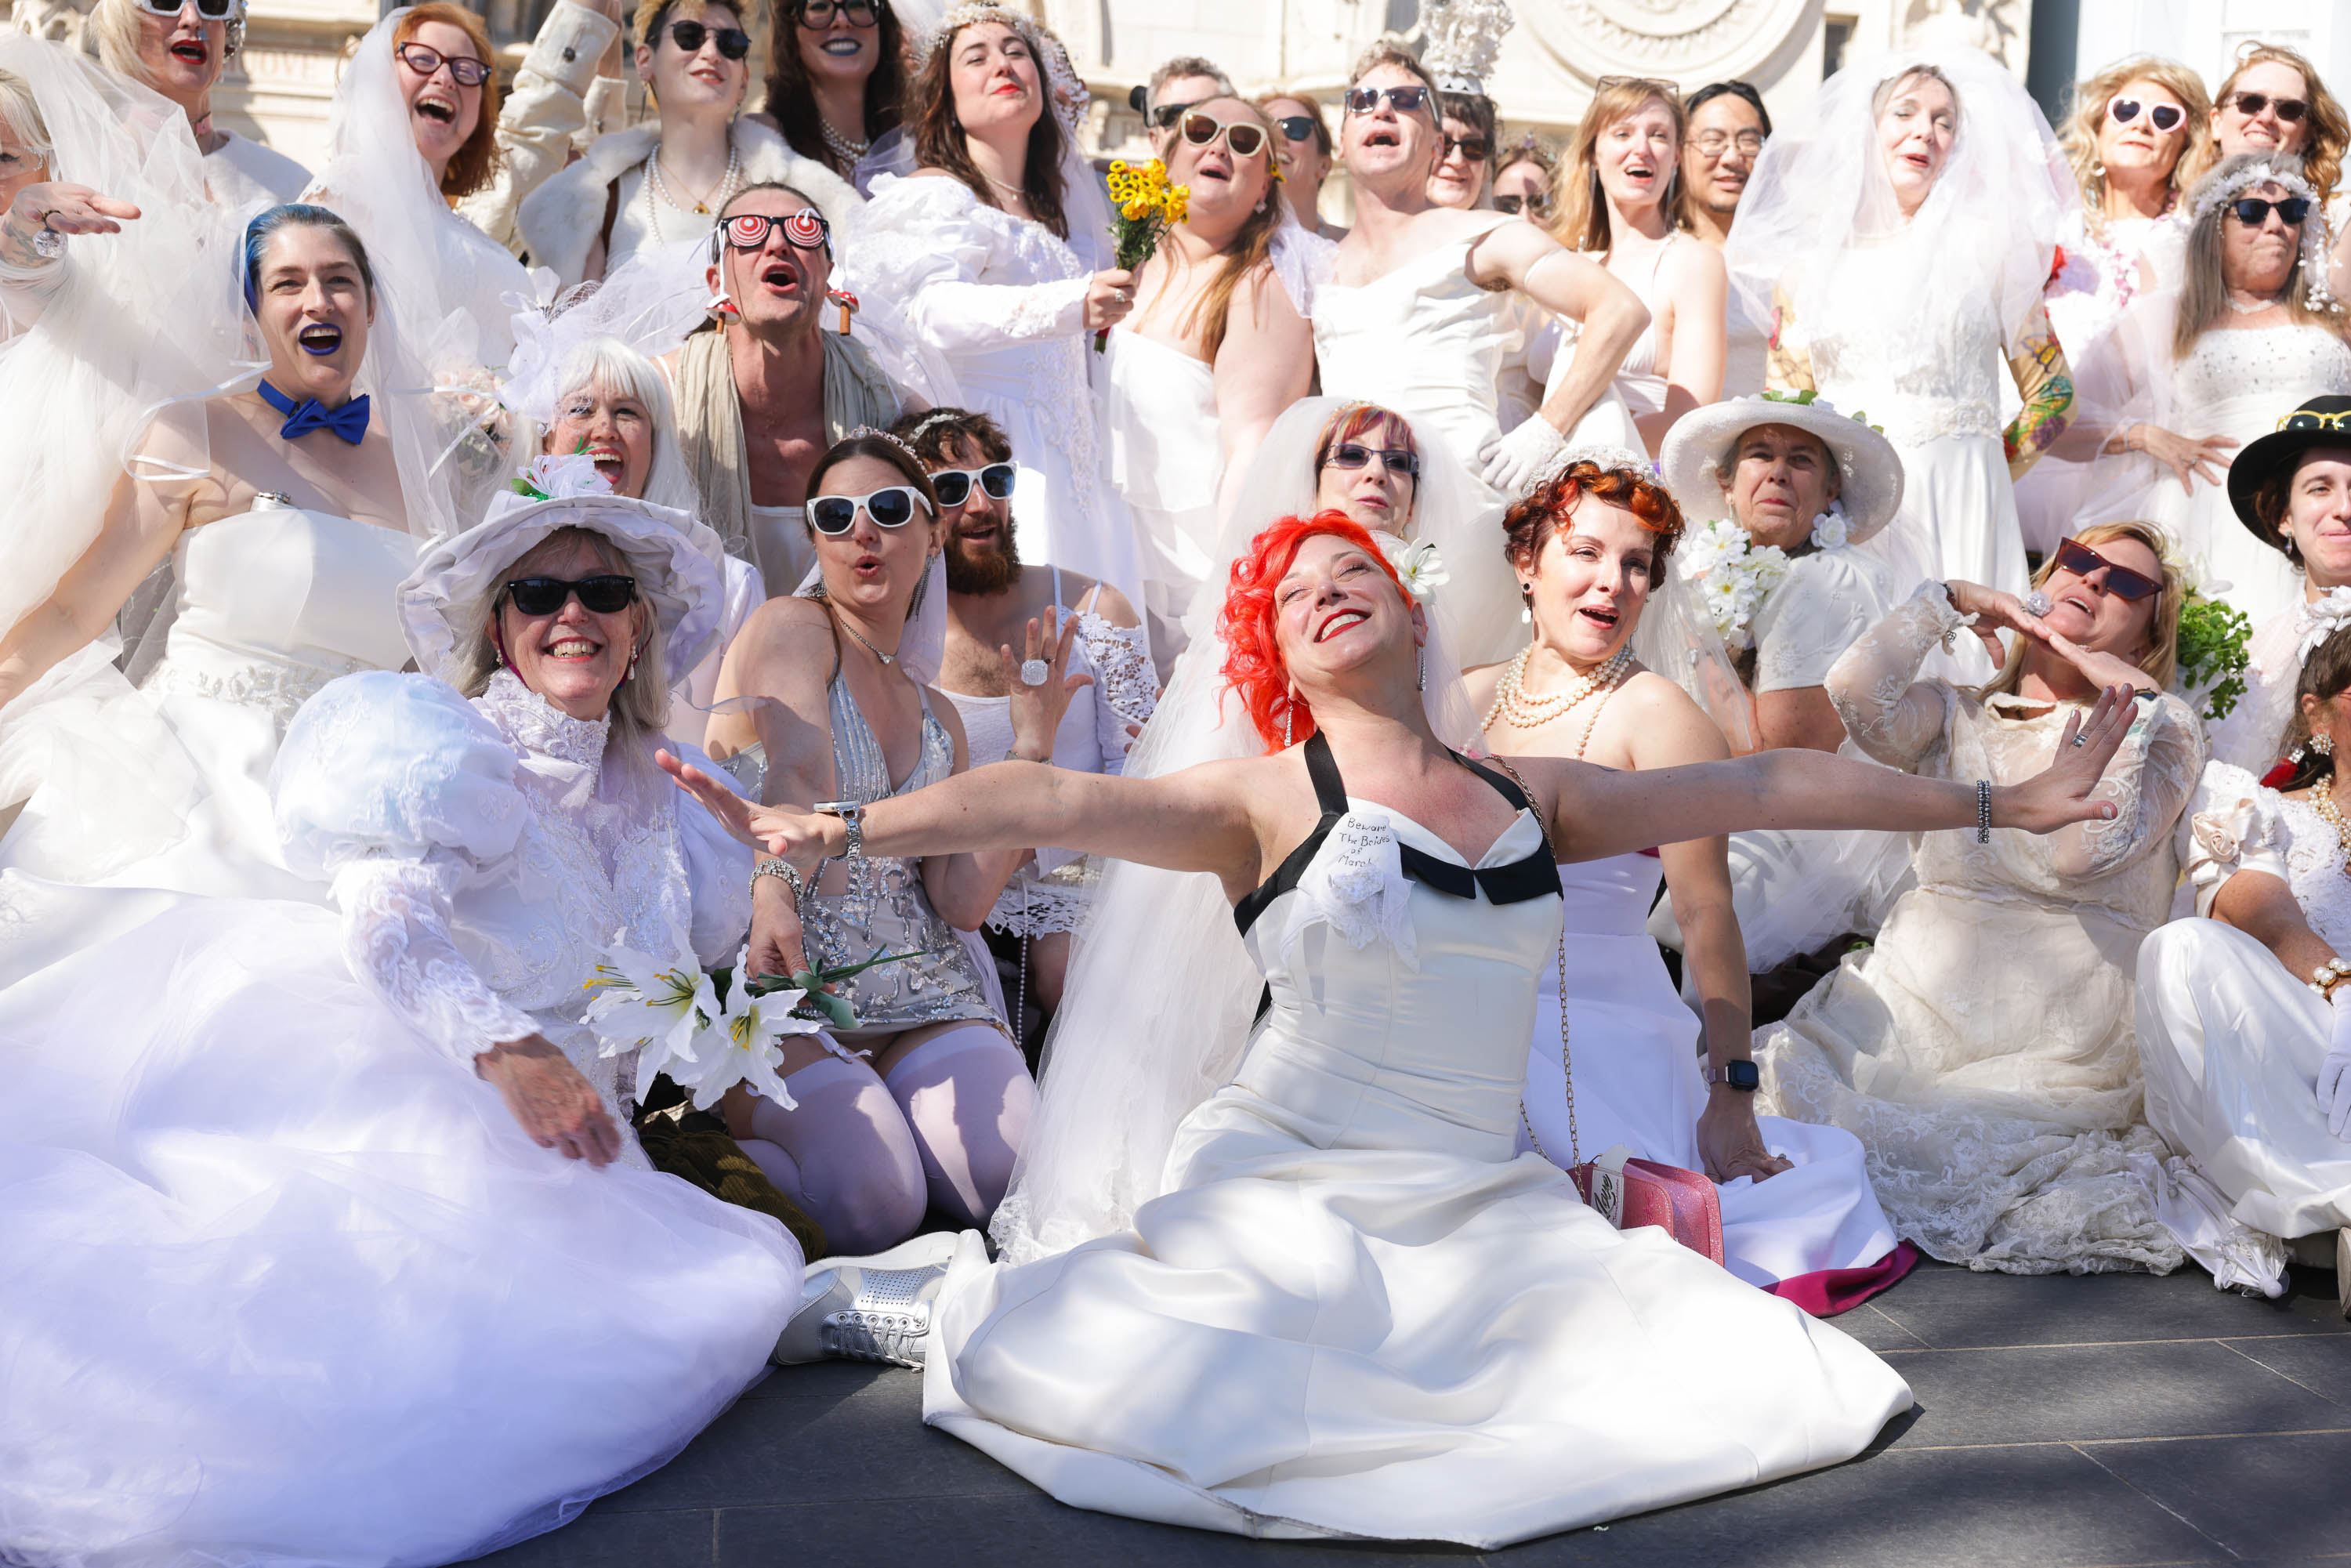 A group of joyful people, some in sunglasses, dressed in various wedding gowns, poses with expressive excitement.